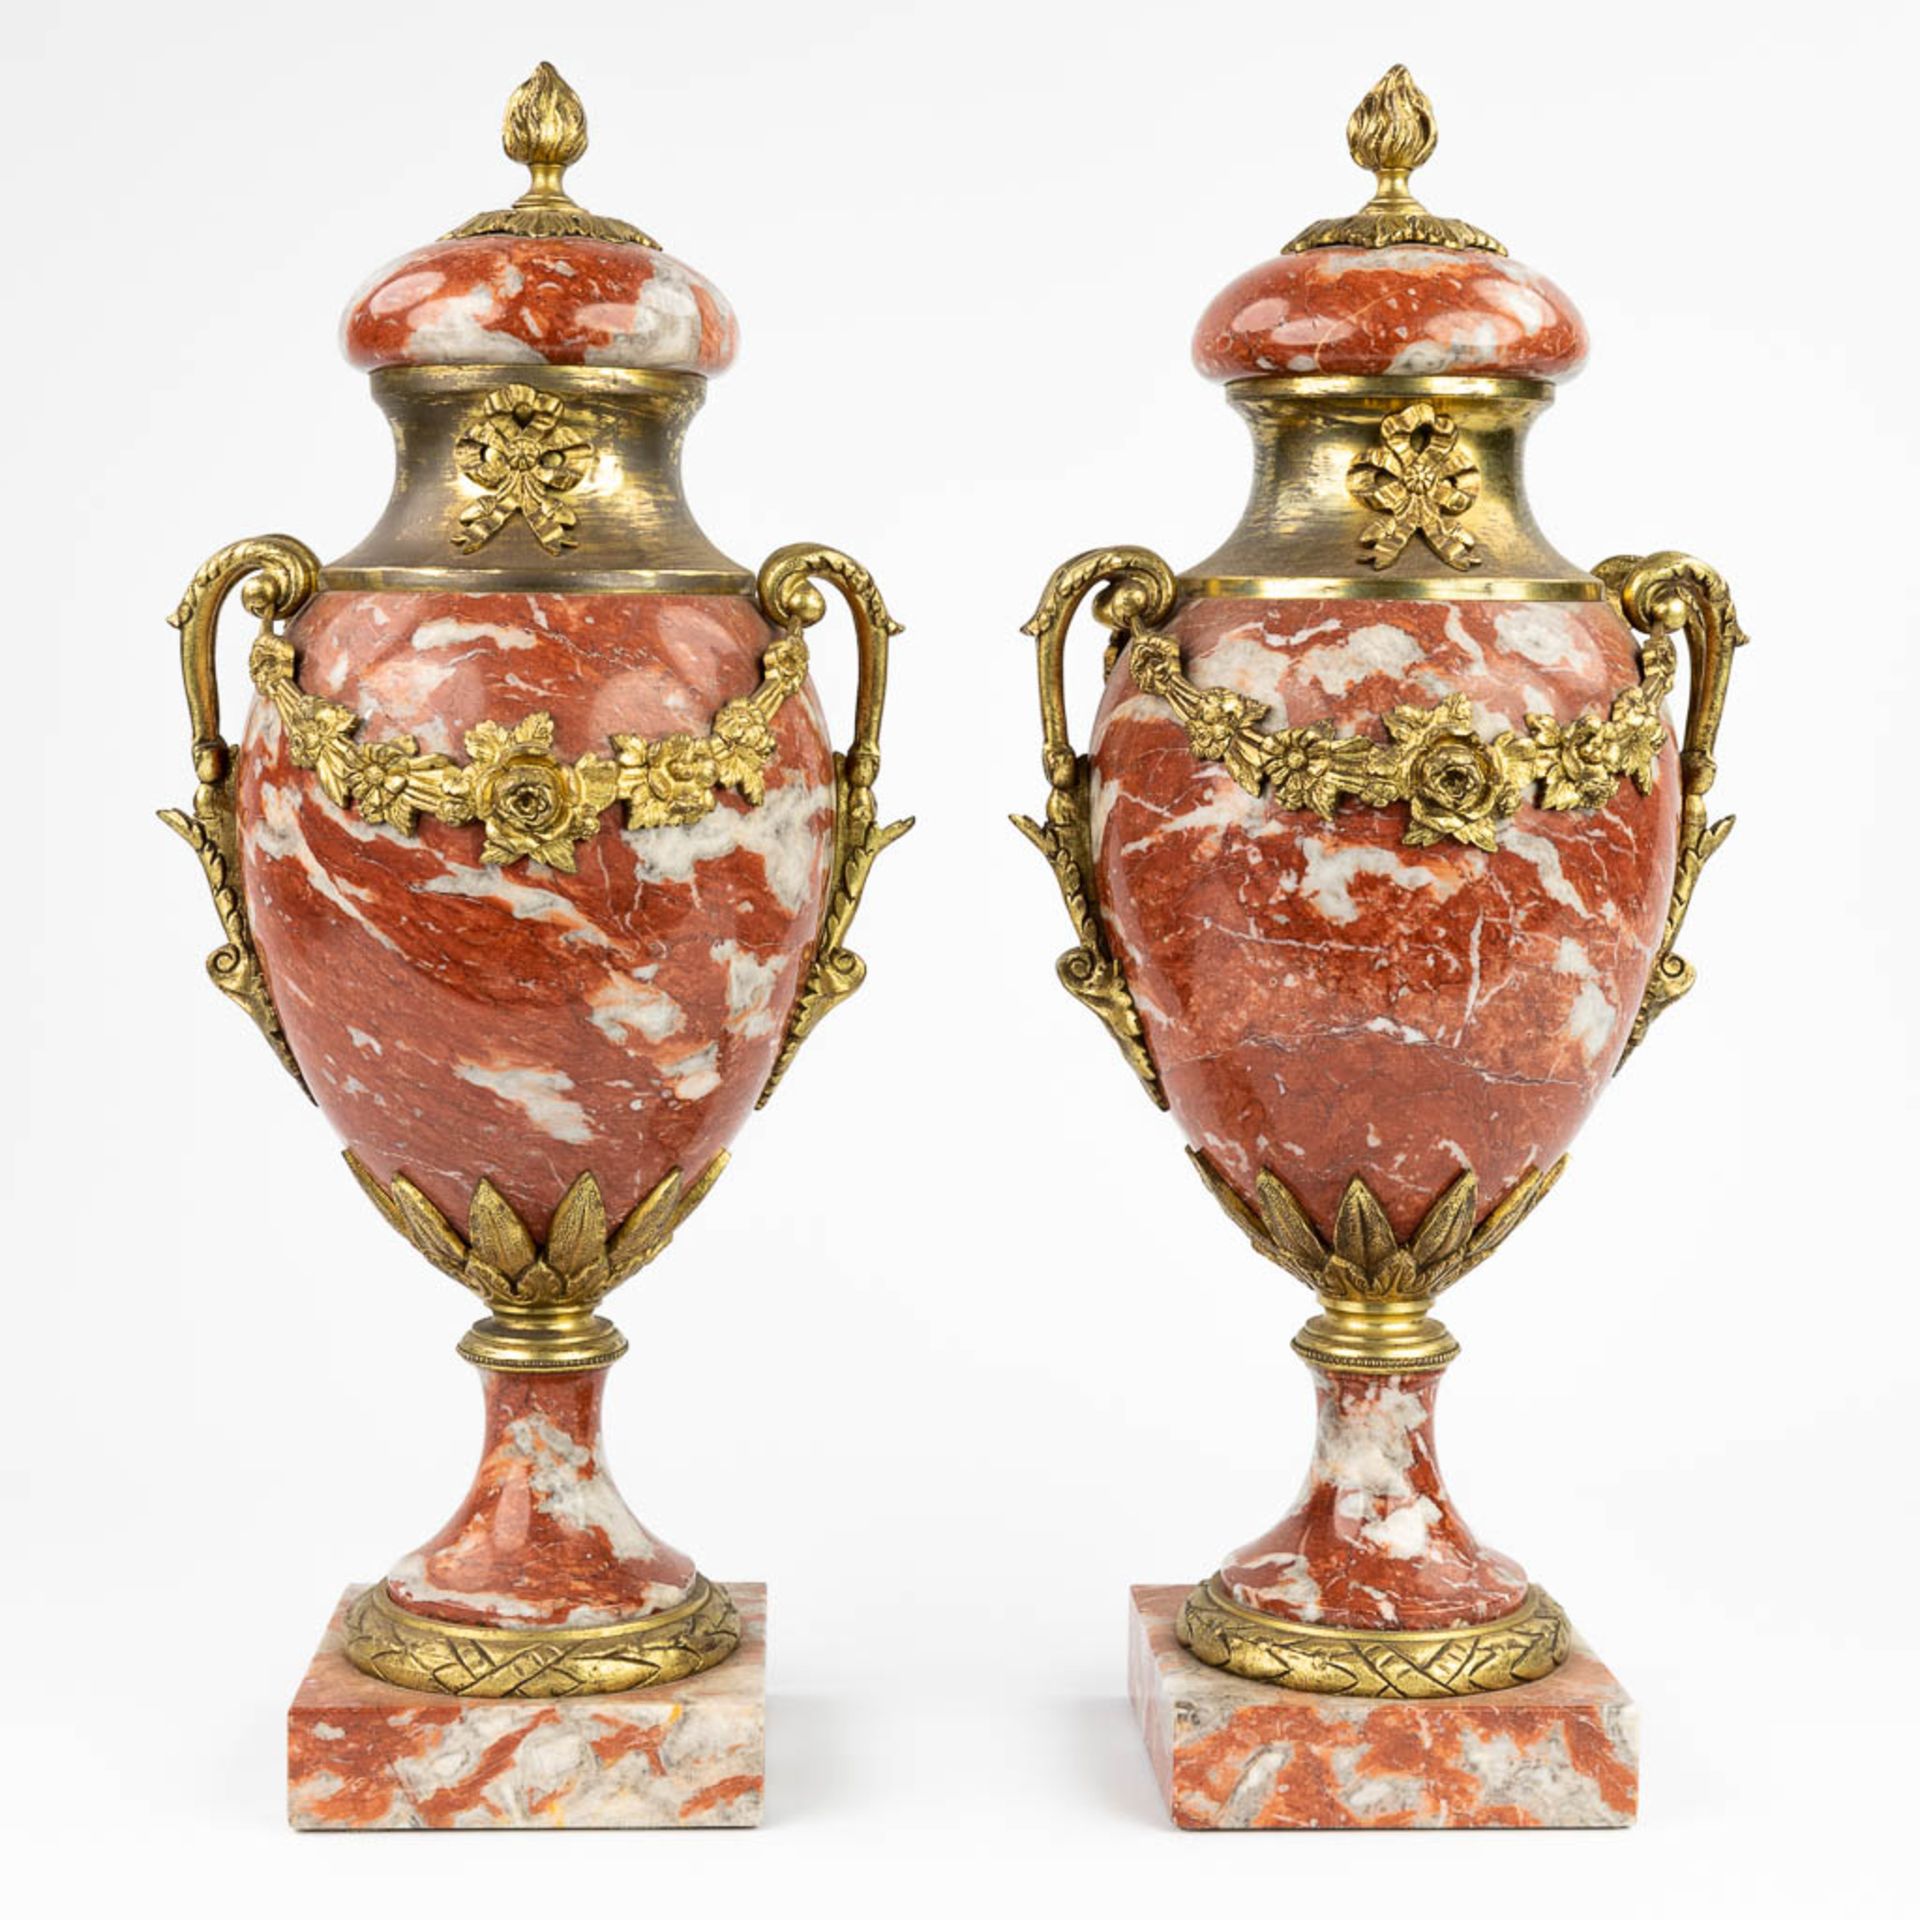 A pair of cassolettes made of red marble mounted with gilt bronze. (16 x 18 x 44,5cm)